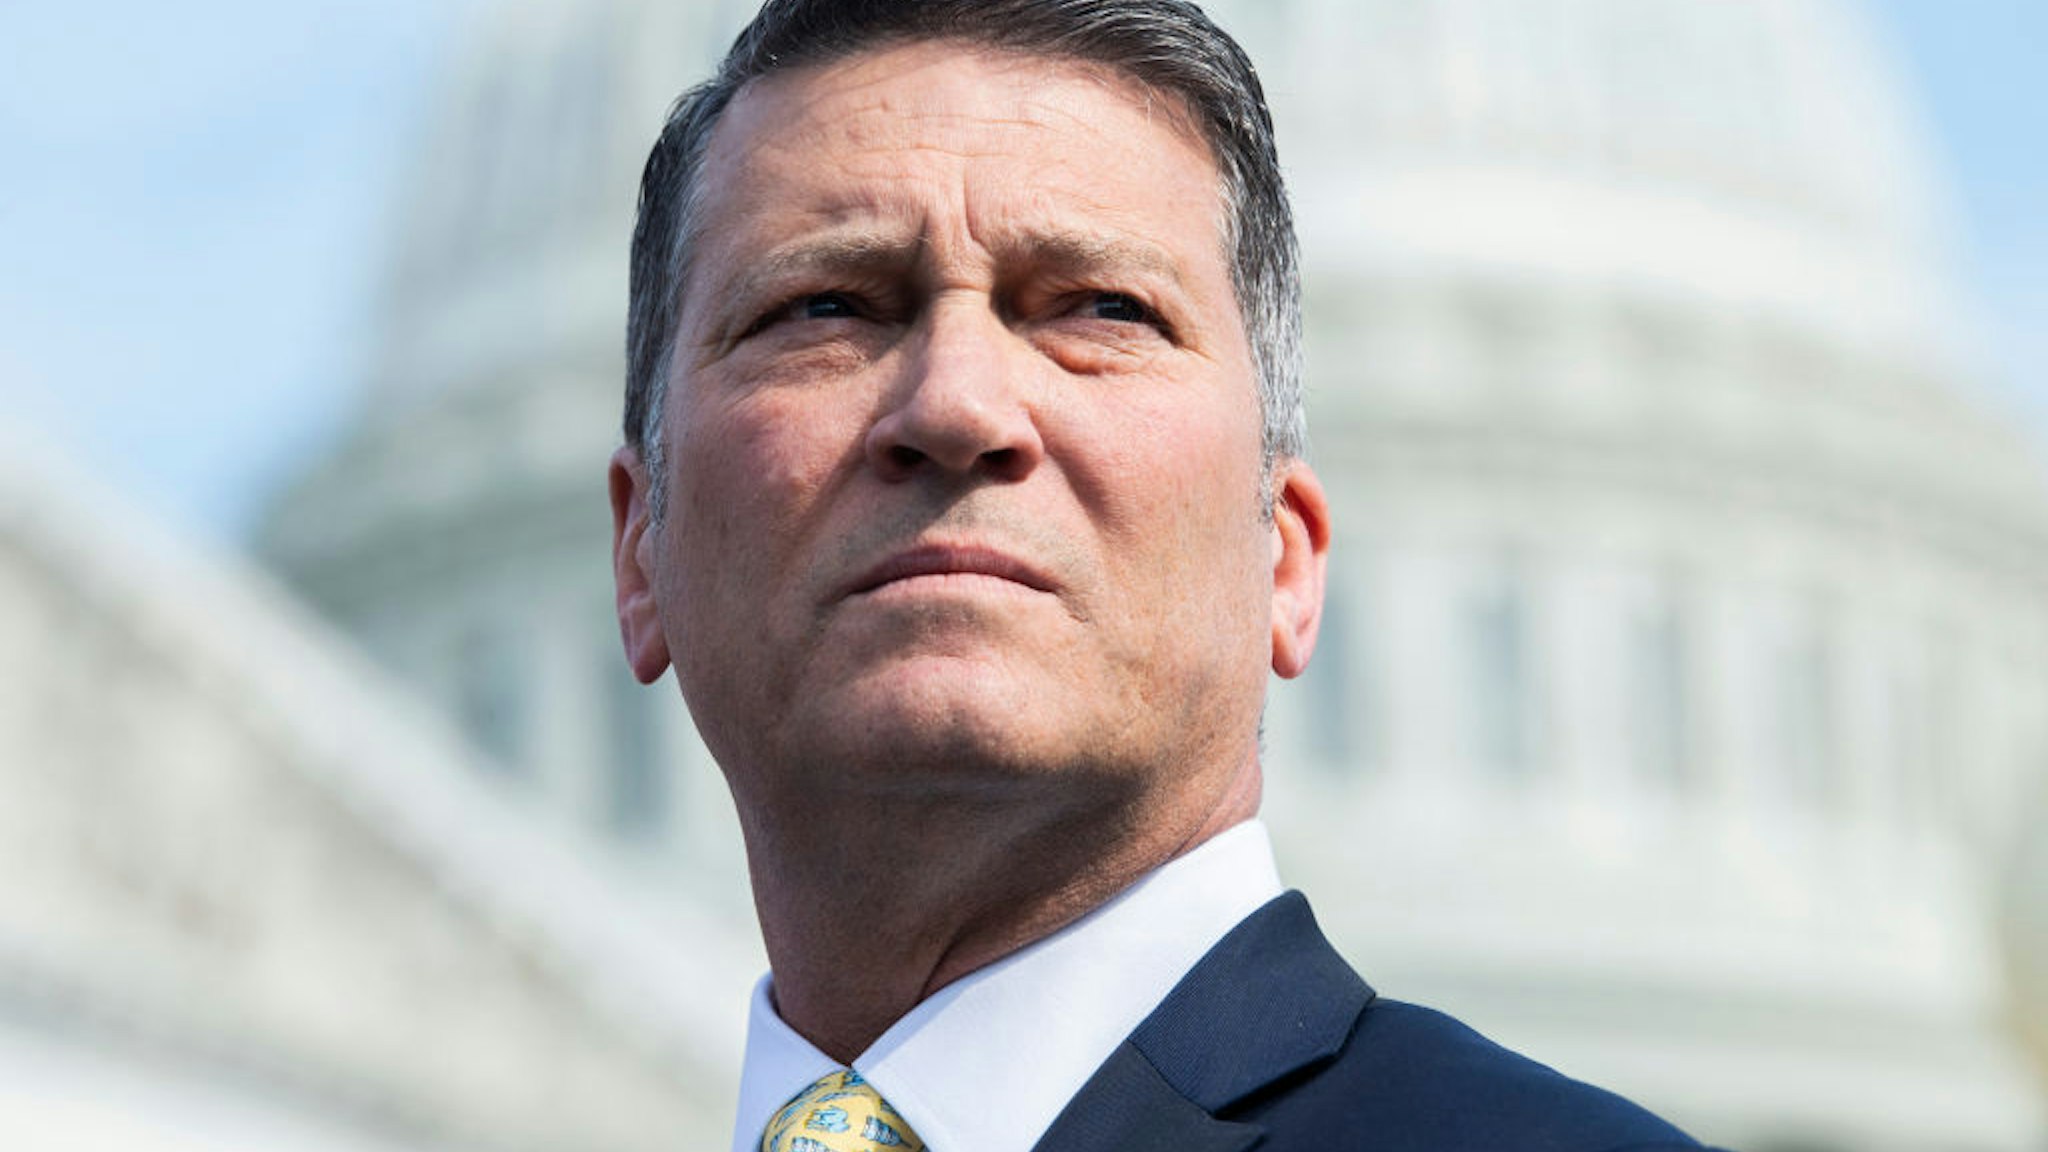 Rep. Ronny Jackson, R-Texas, attends a news conference with the GOP Doctors Caucus on the origins of covid-19, the delta variant, and vaccines, outside of the Capitol on Thursday, July 22, 2021.